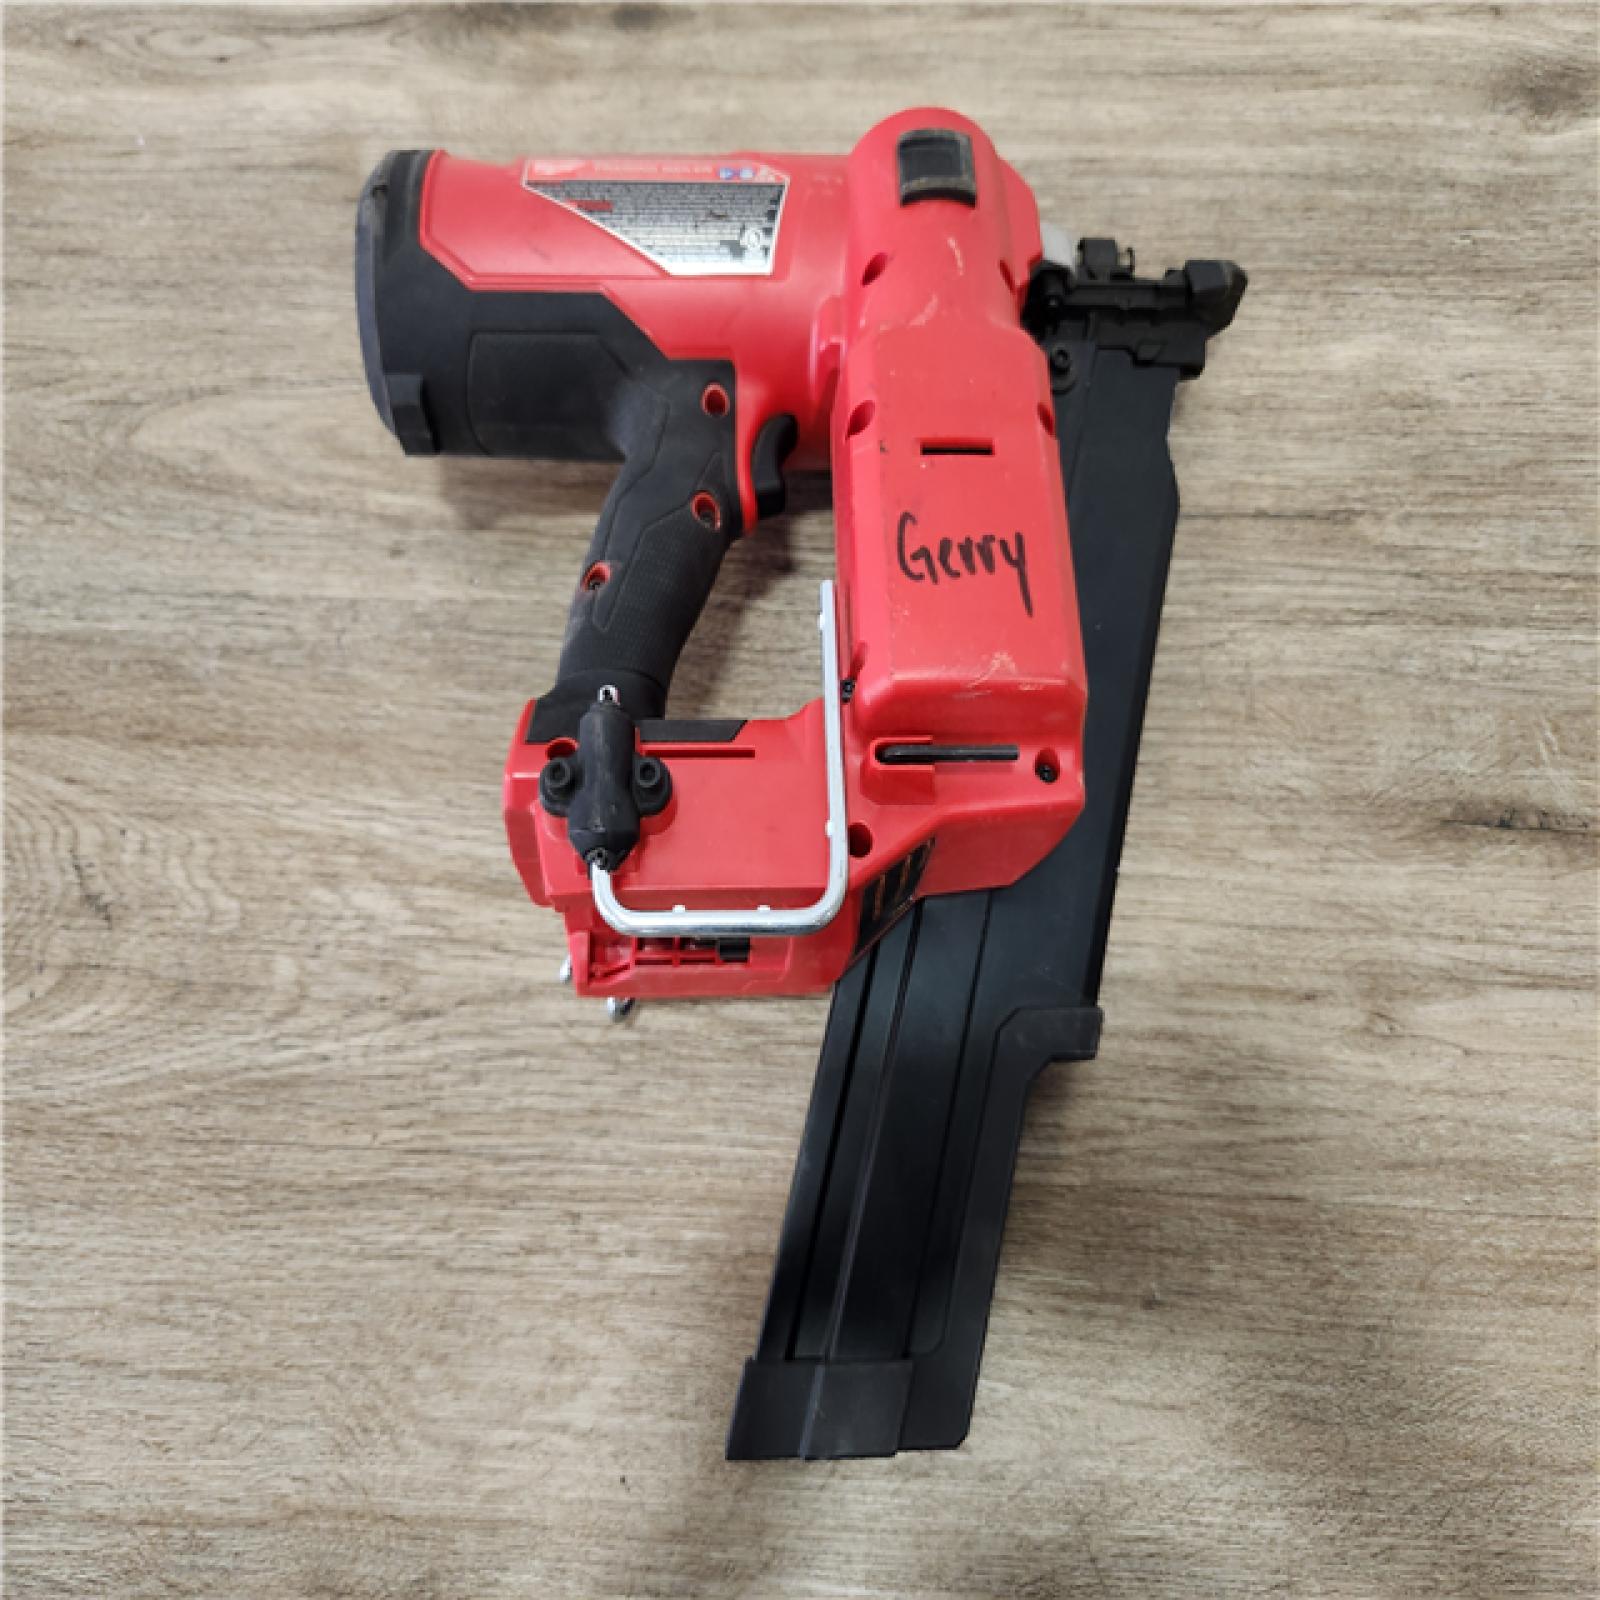 Phoenix Location Milwaukee M18 FUEL 3-1/2 in. 18-Volt 21-Degree Lithium-Ion Brushless Cordless Framing Nailer (Tool-Only)